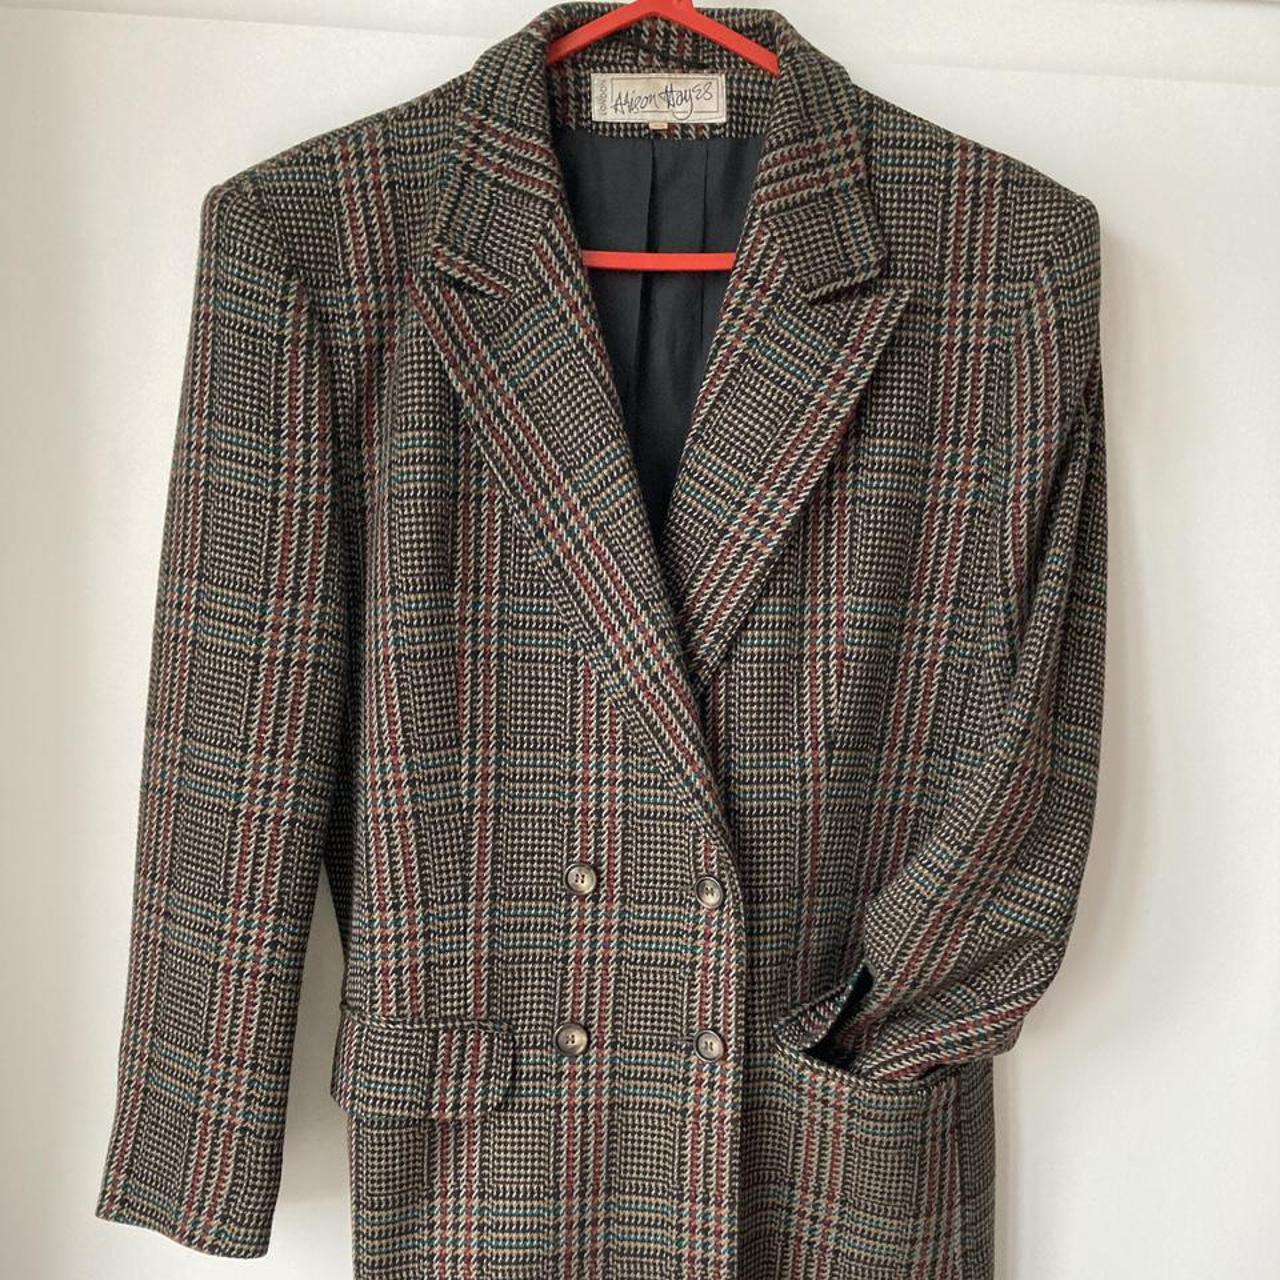 Womens vintage tweed suit by Alison Hayes with two... - Depop